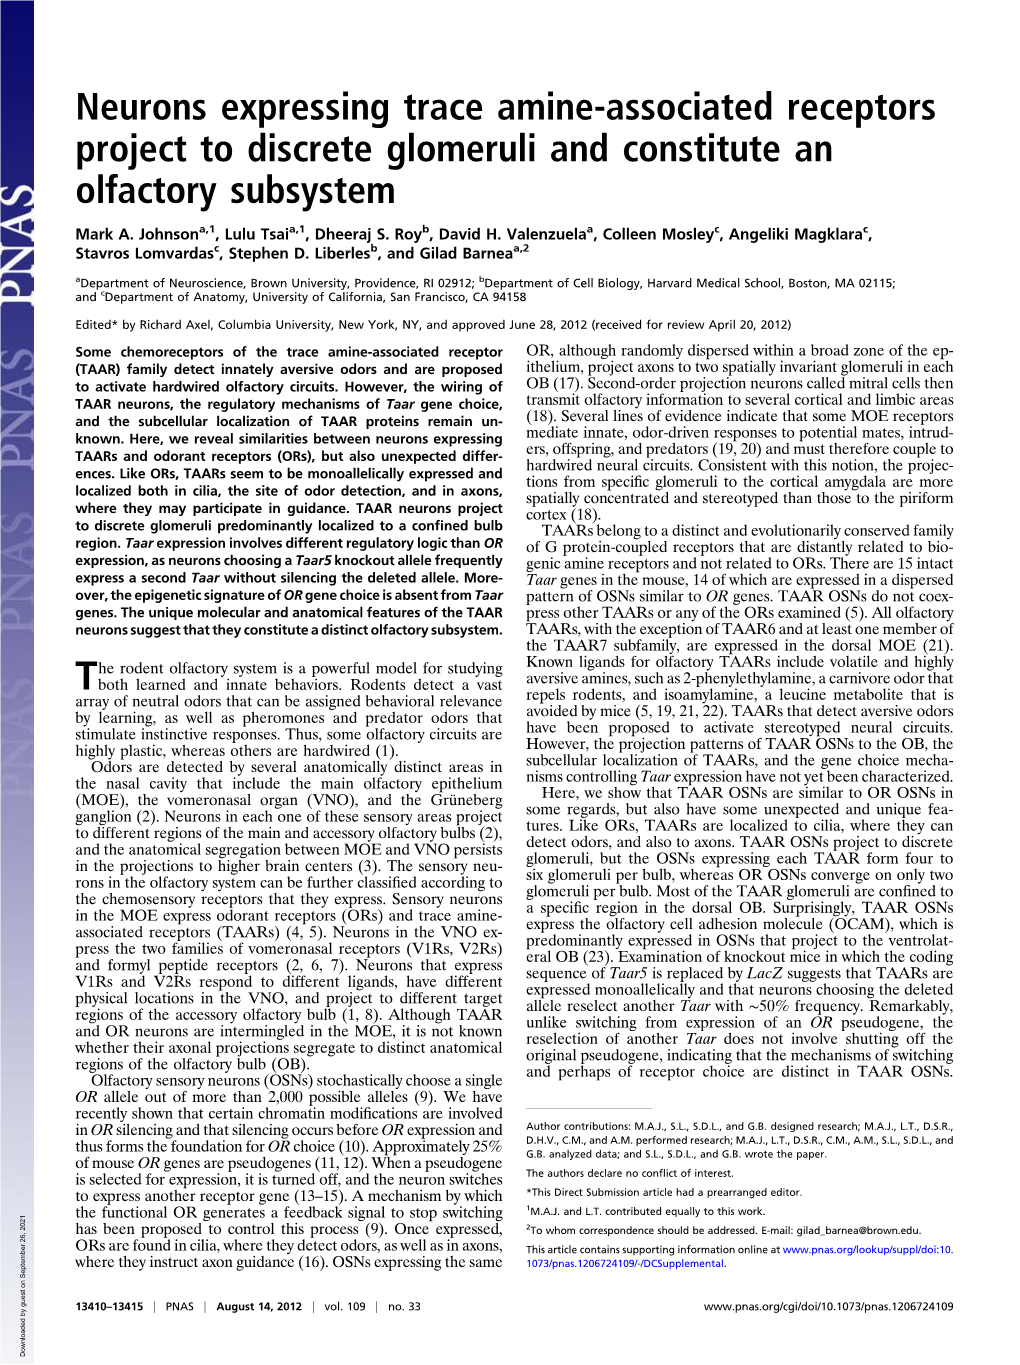 Neurons Expressing Trace Amine-Associated Receptors Project to Discrete Glomeruli and Constitute an Olfactory Subsystem